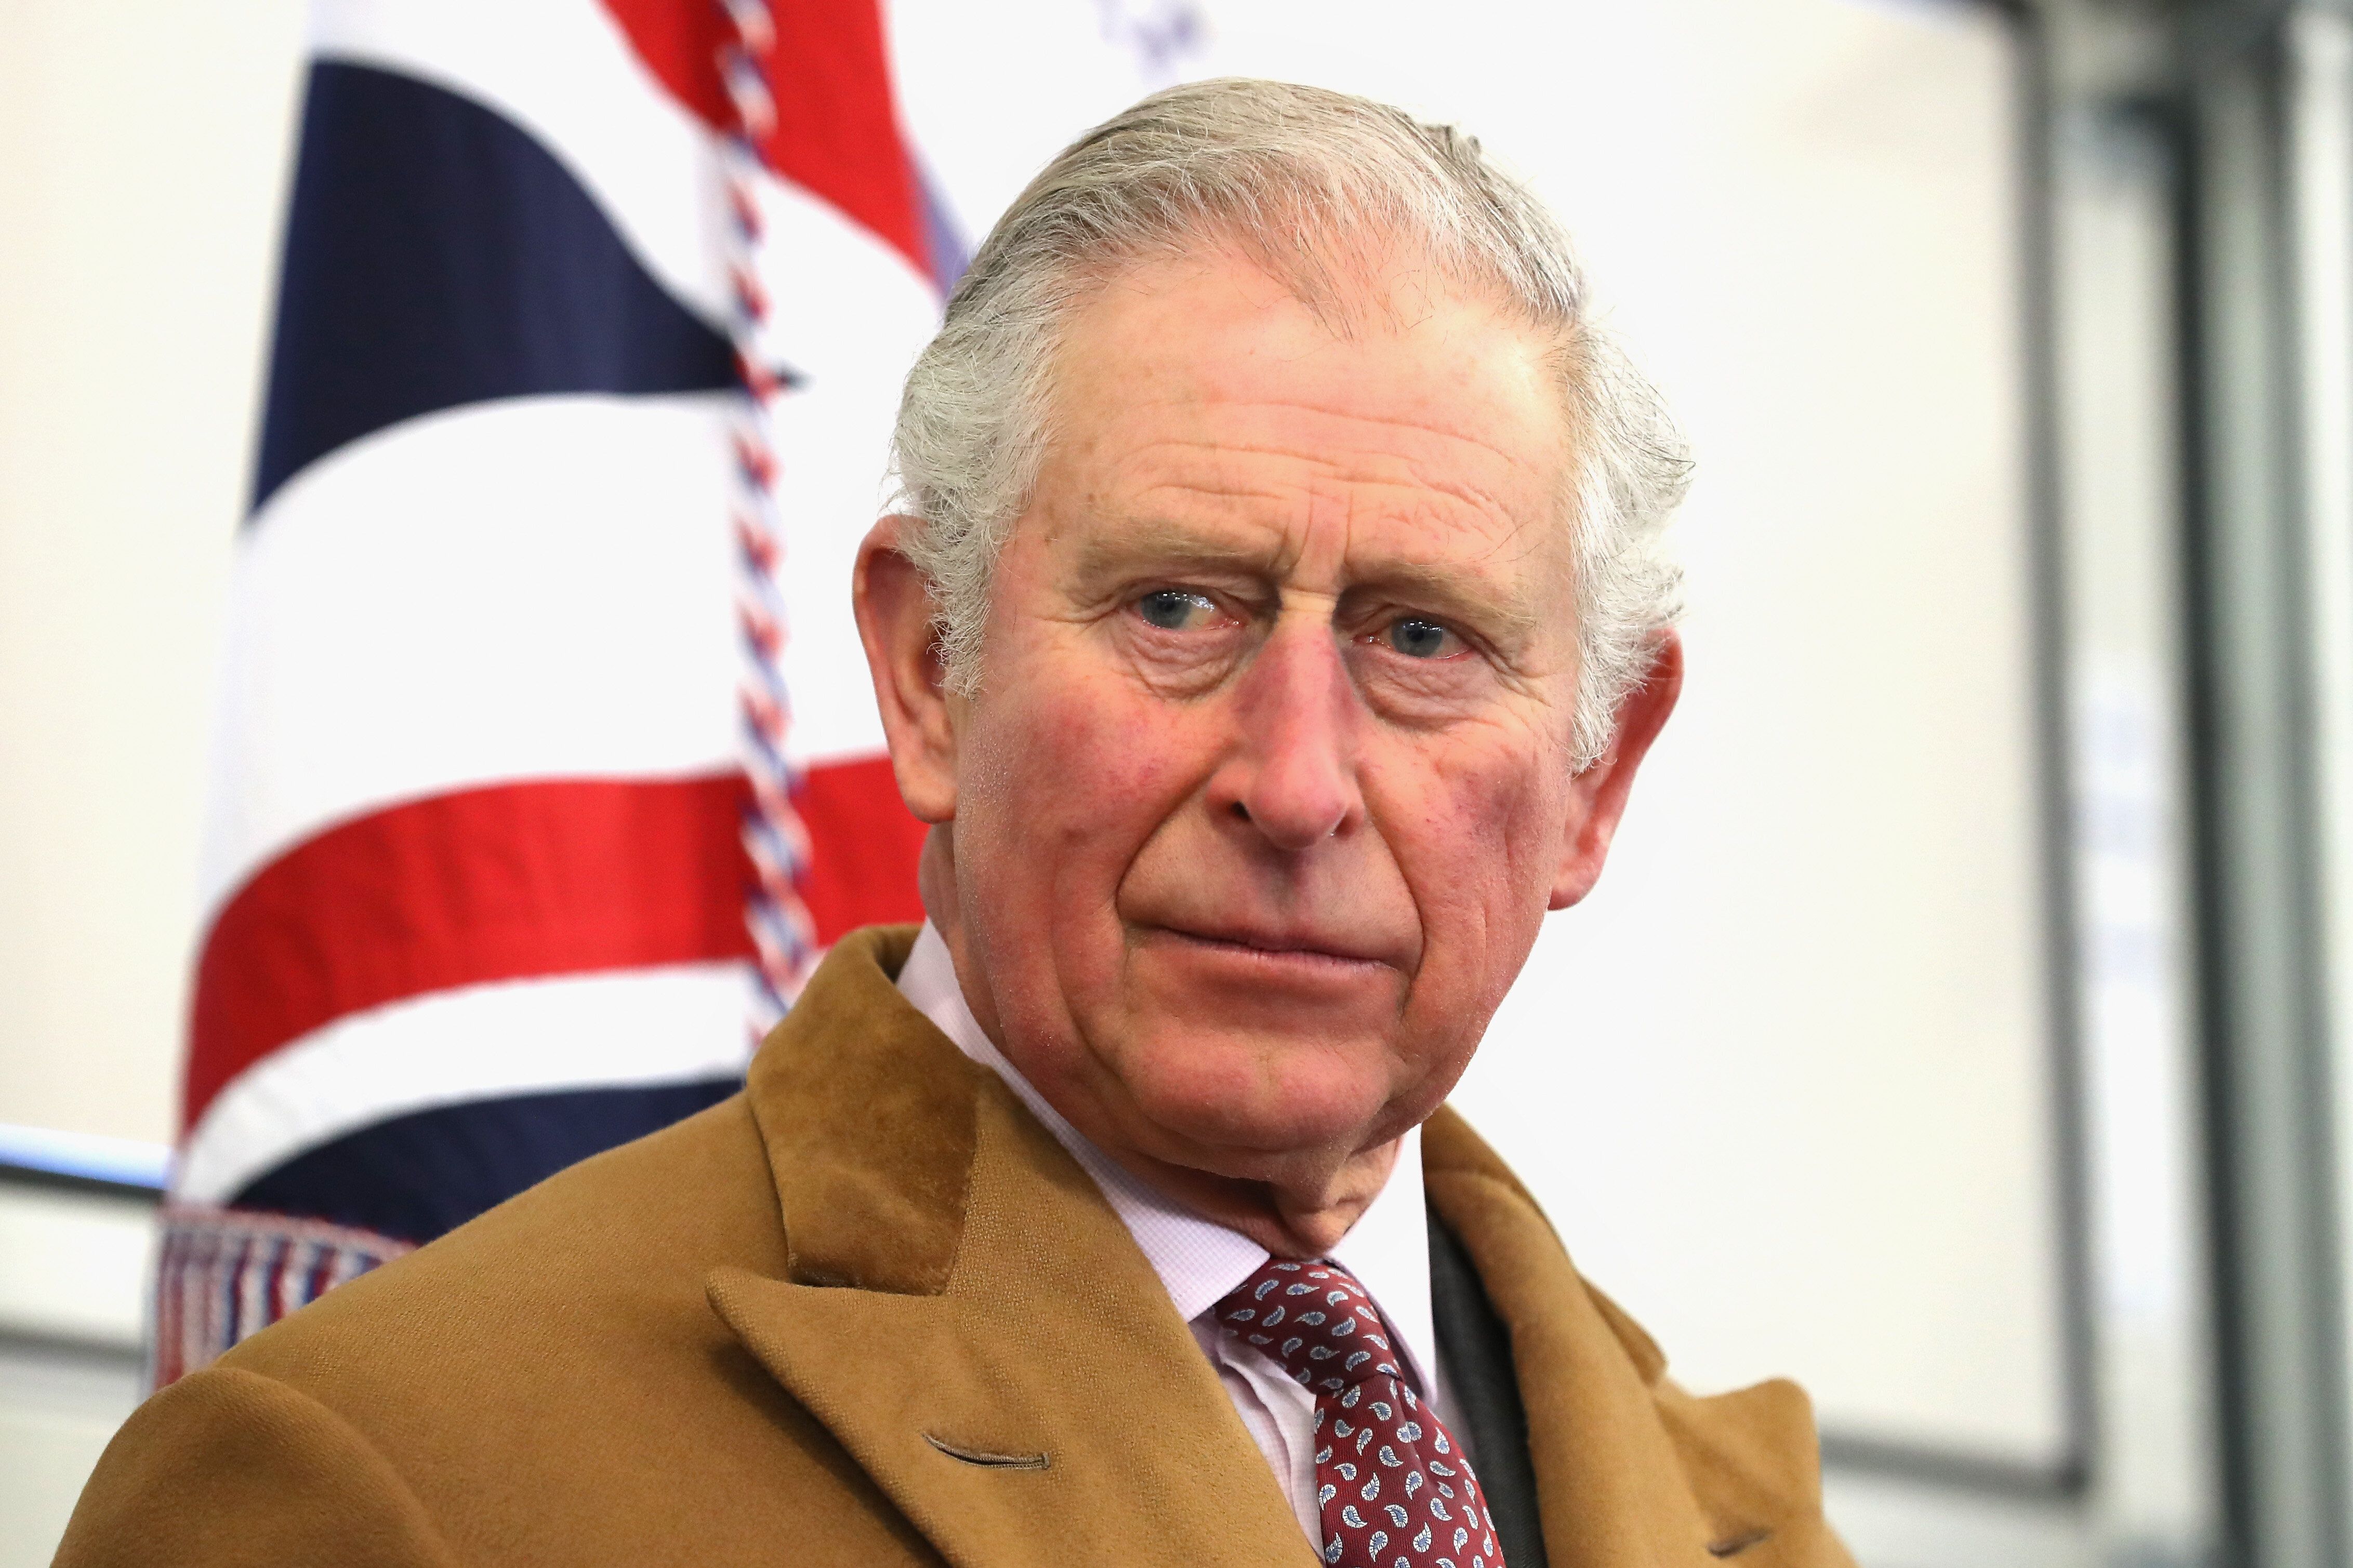 The Prince of Wales visits the new Emergency Service Station at Barnard Castle on Feb. 15, 2018 in Durham, England.